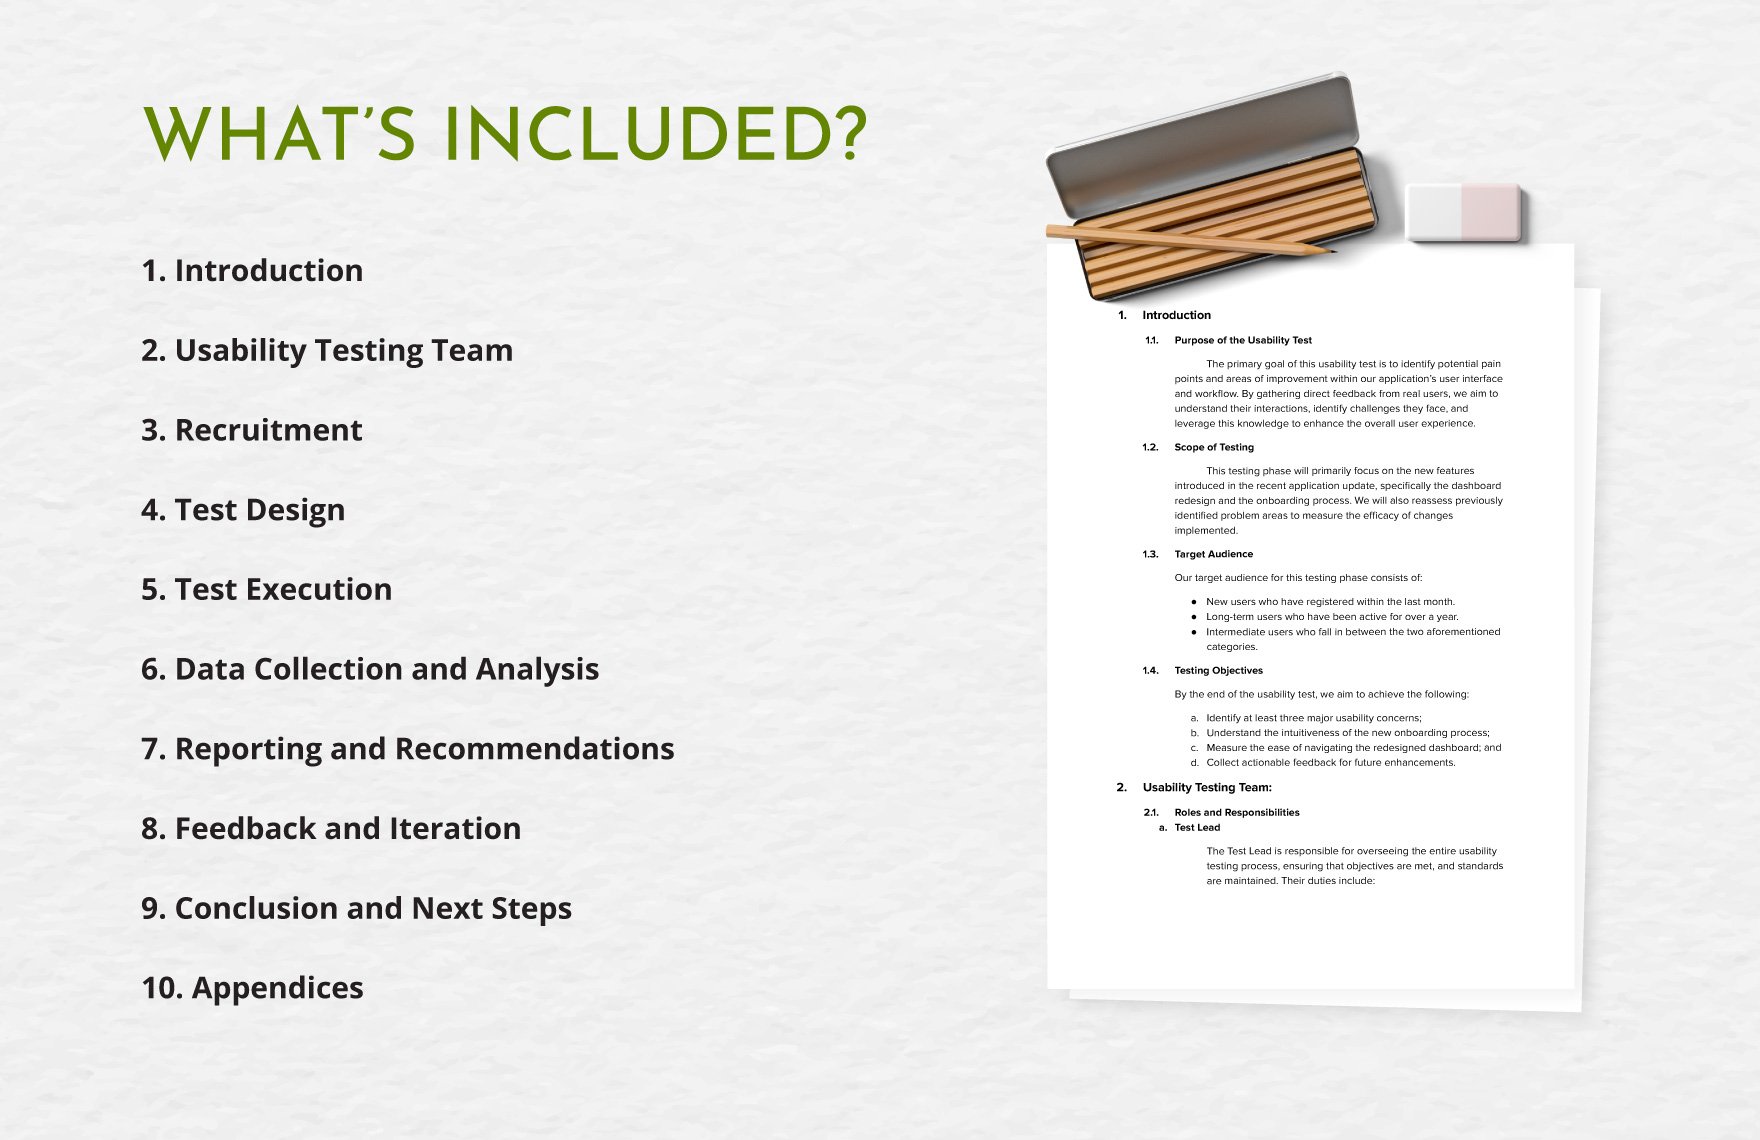 IT UX Usability Testing Plan Template